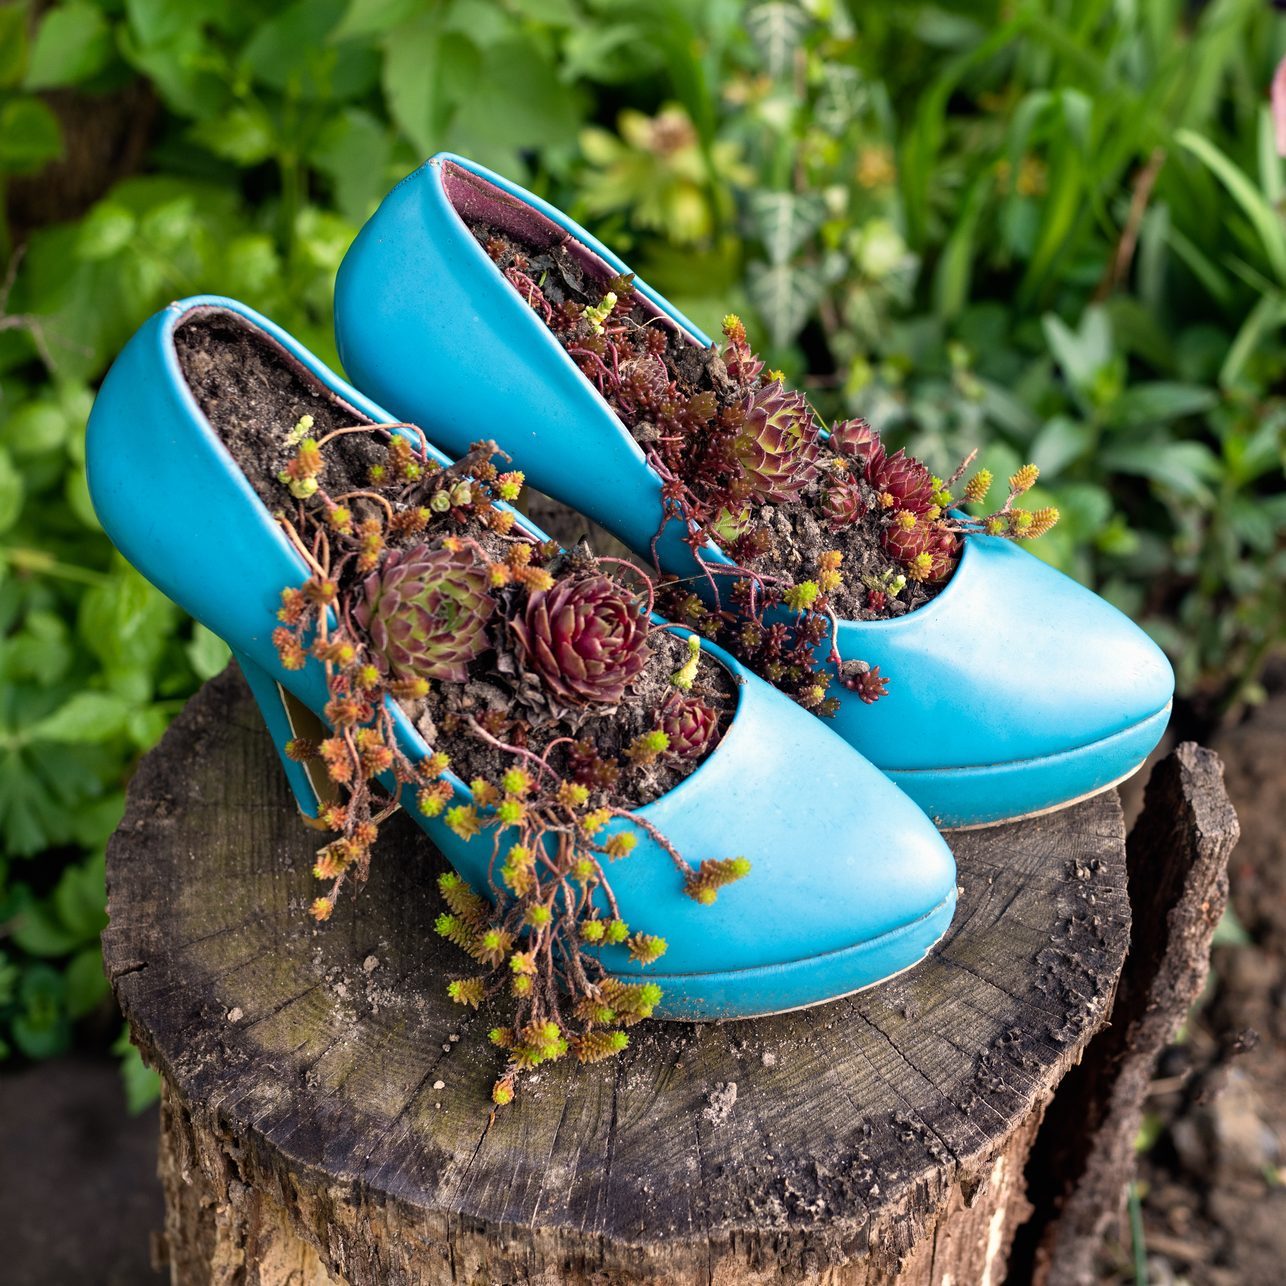 Blue high heels recycled shoes with plants on a tree stump in the garden. Sustainable gardening concept as a design idea.